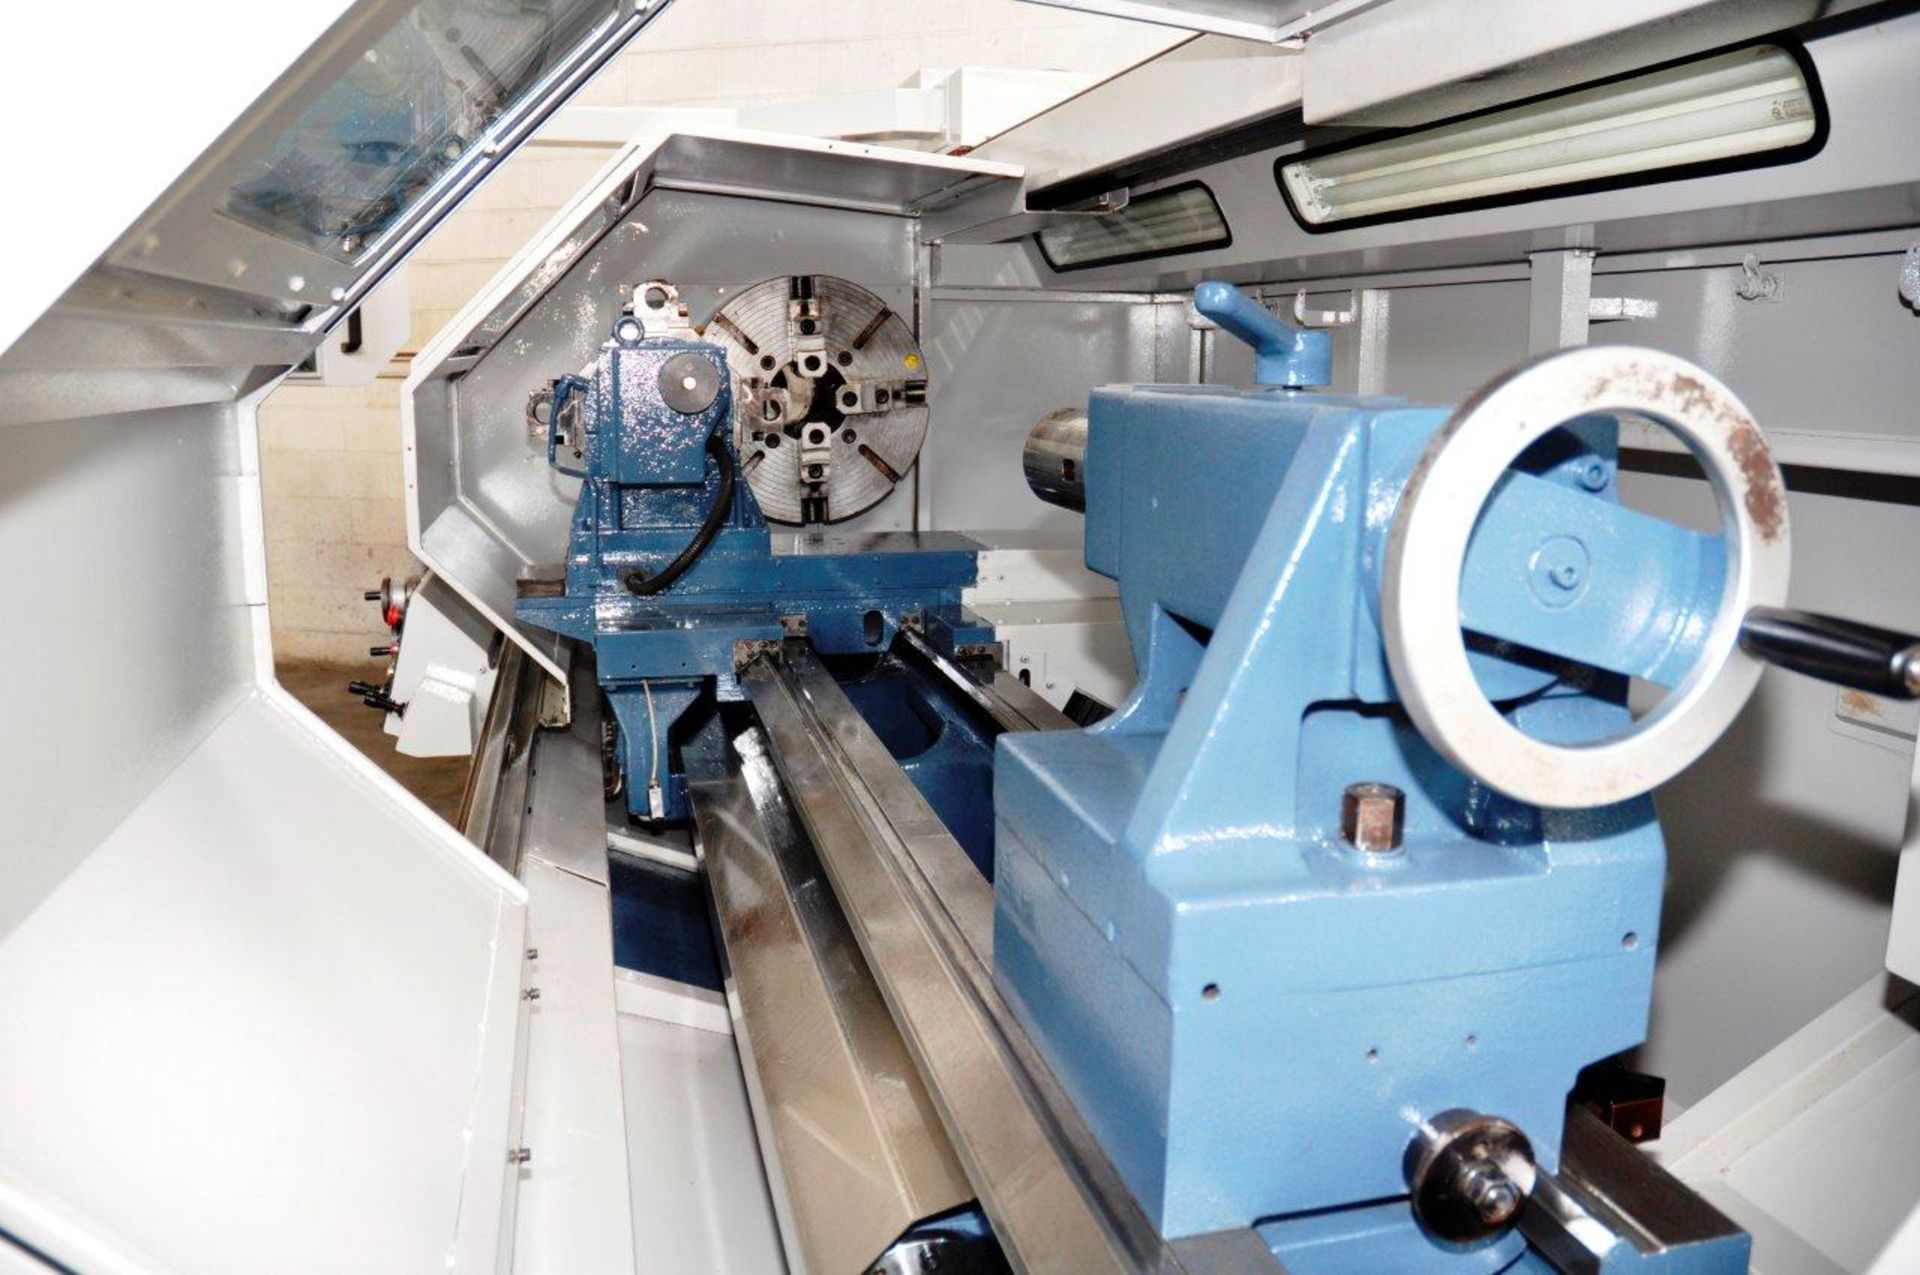 CNC LATHE, ROMI MDL. M-27 27" X 80" COMBINATION, new 2007, equipped w/GE Fanuc 21i-T CNC control, - Image 8 of 12